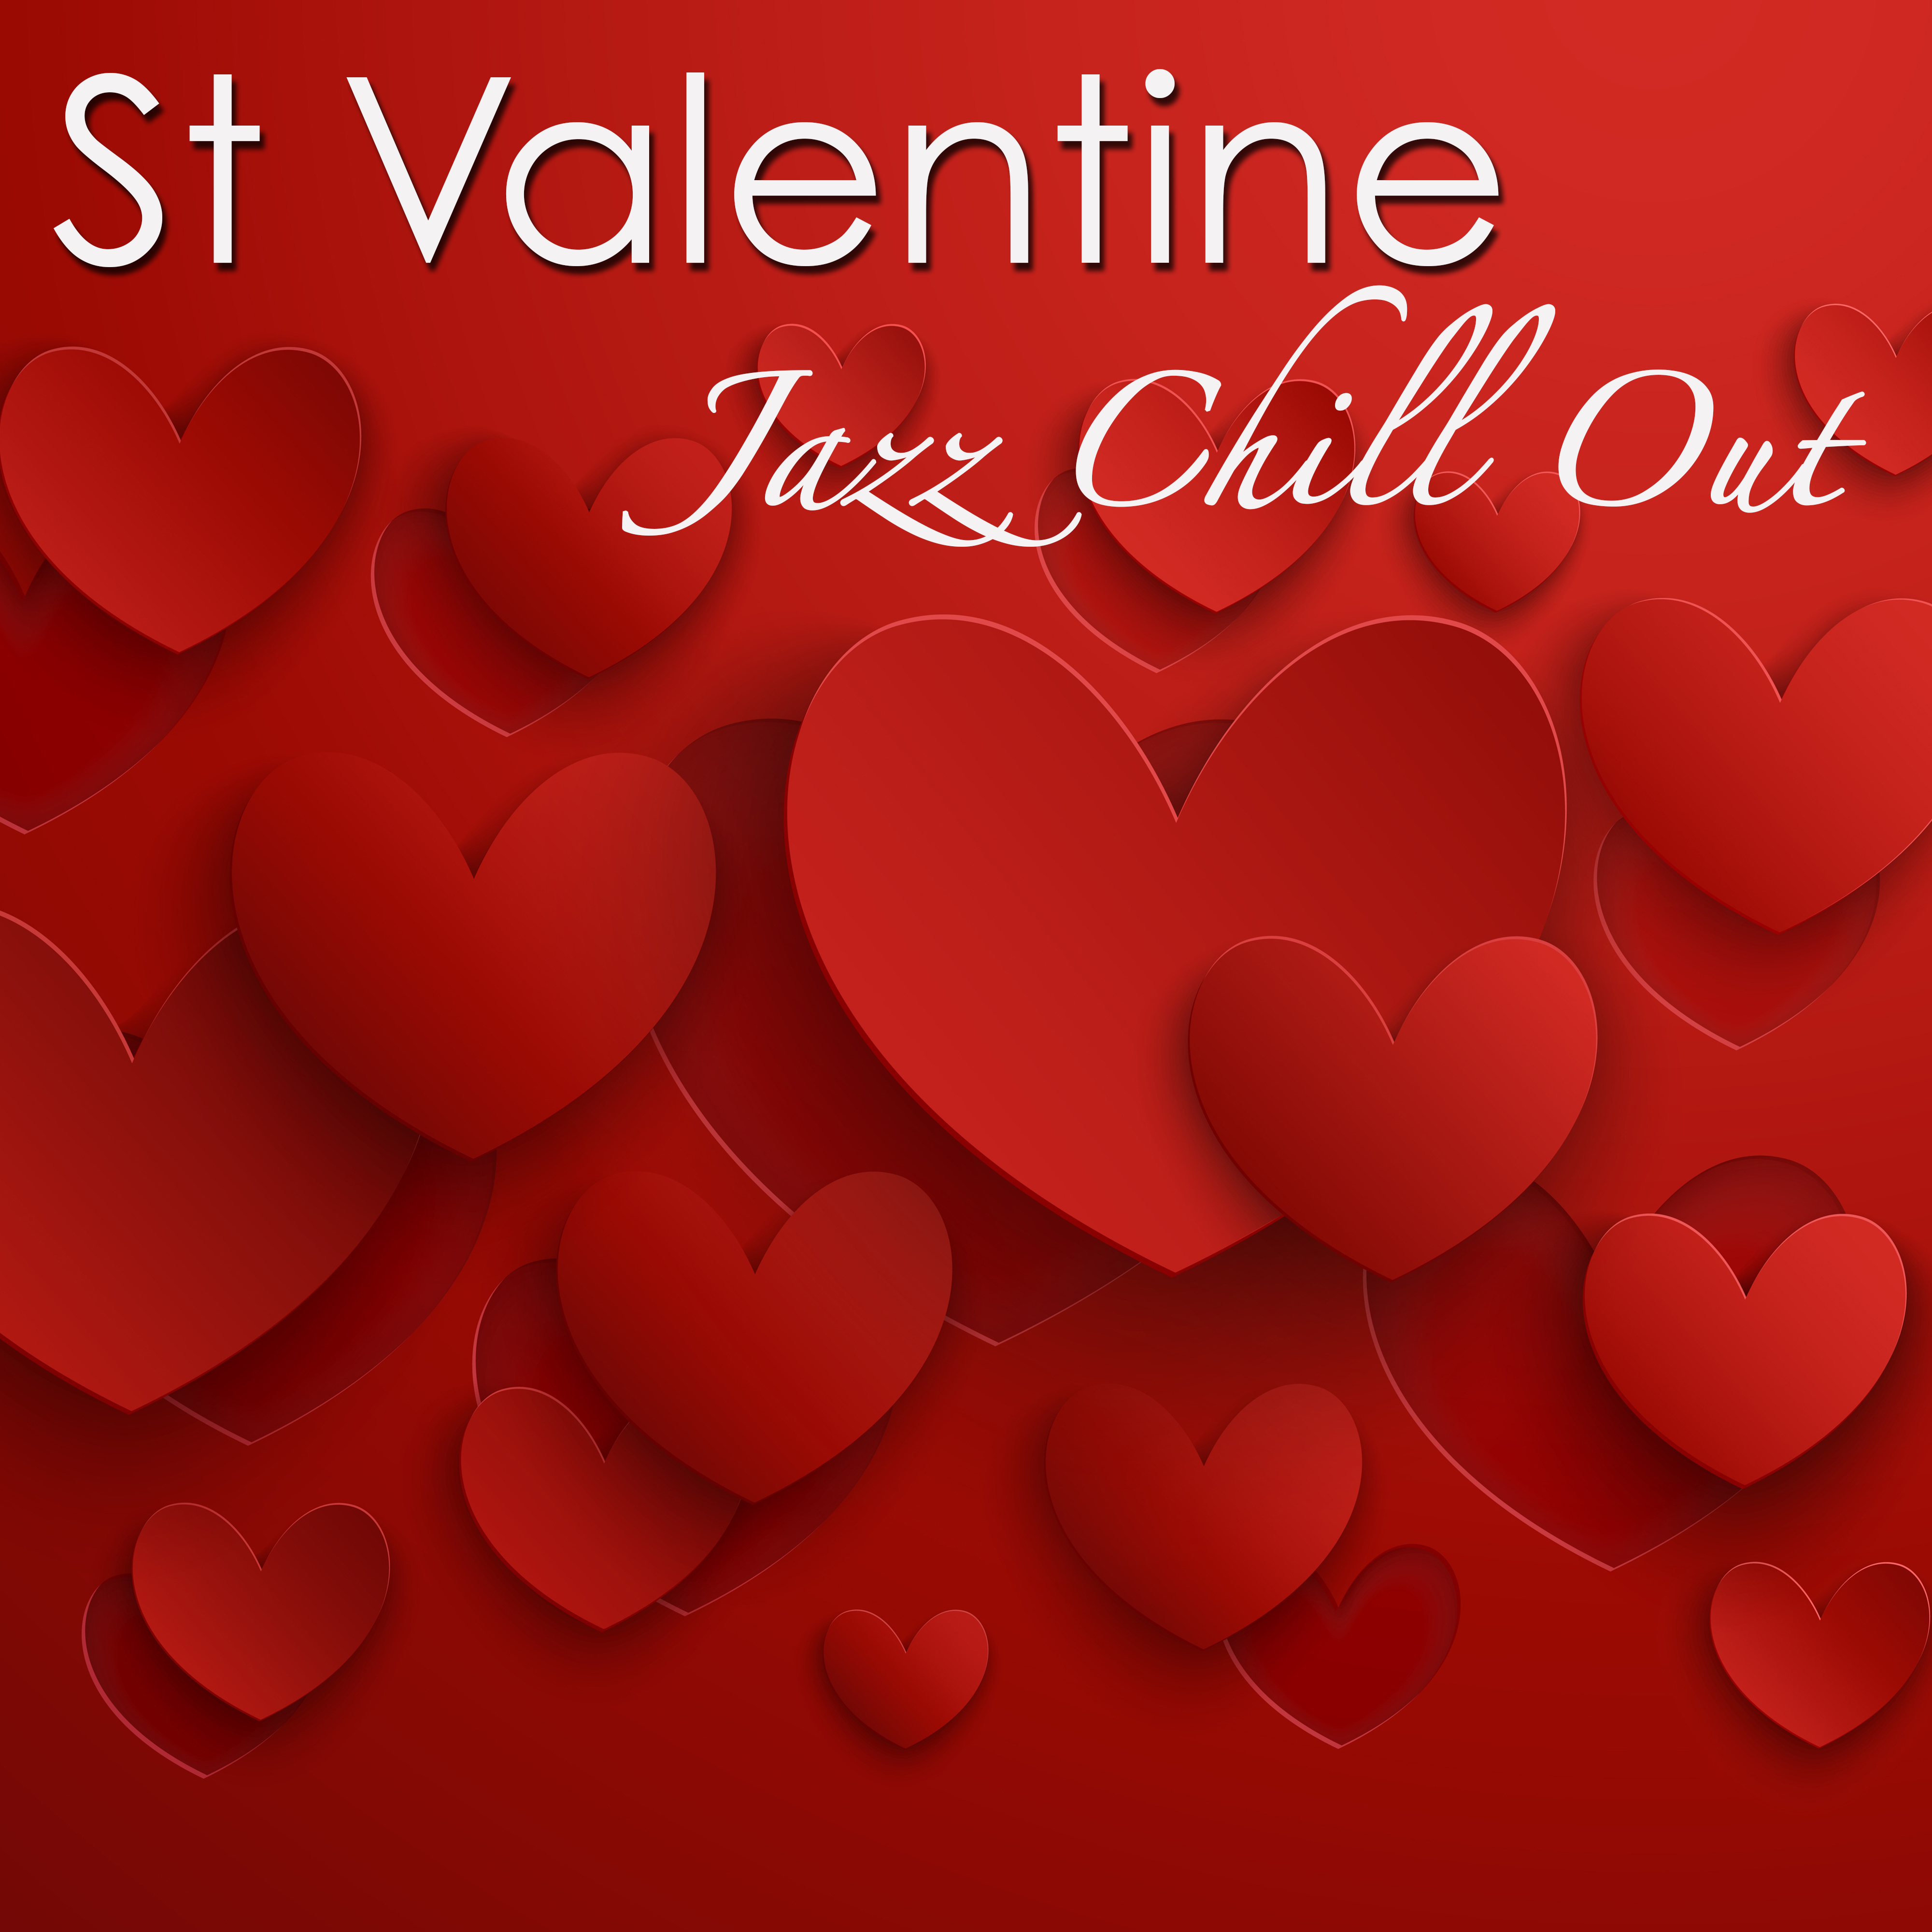 St Valentine Jazz Chill Out  Sensual Chillout, Smooth Jazz  Ambient Lounge Electronic Music for Love Day Sexy Night